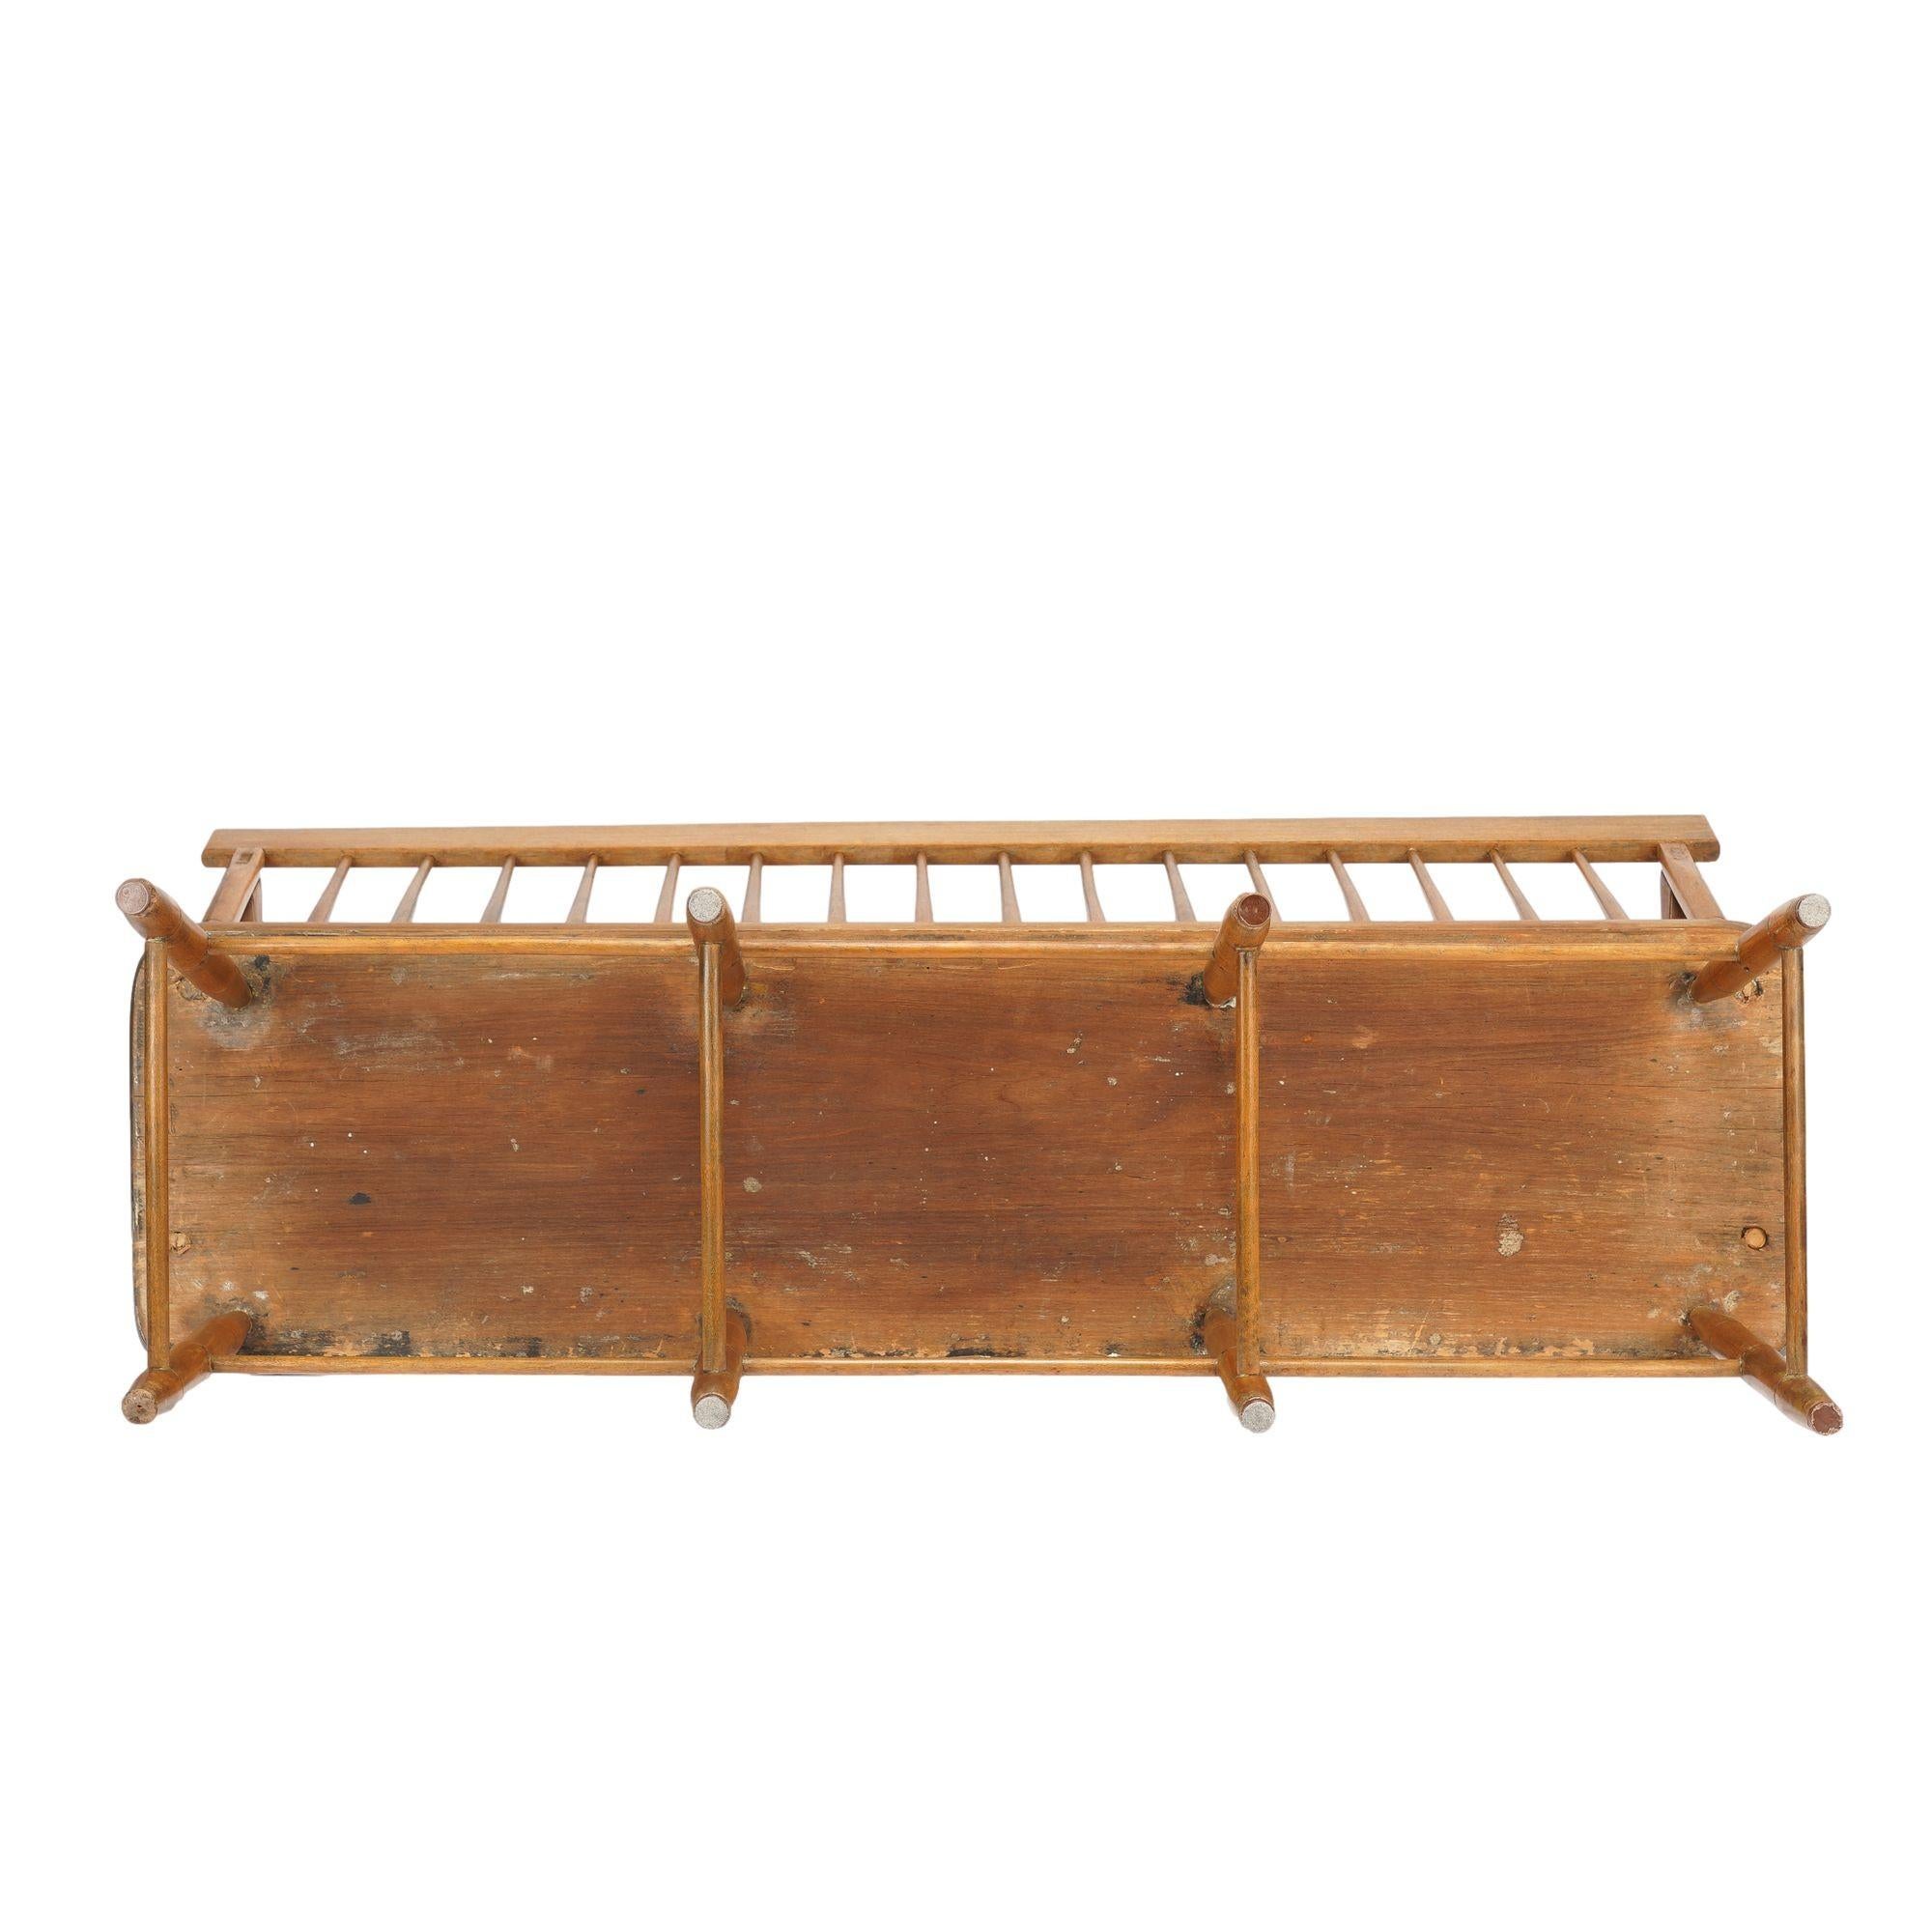 American Windsor bench, c. 1830 For Sale 6